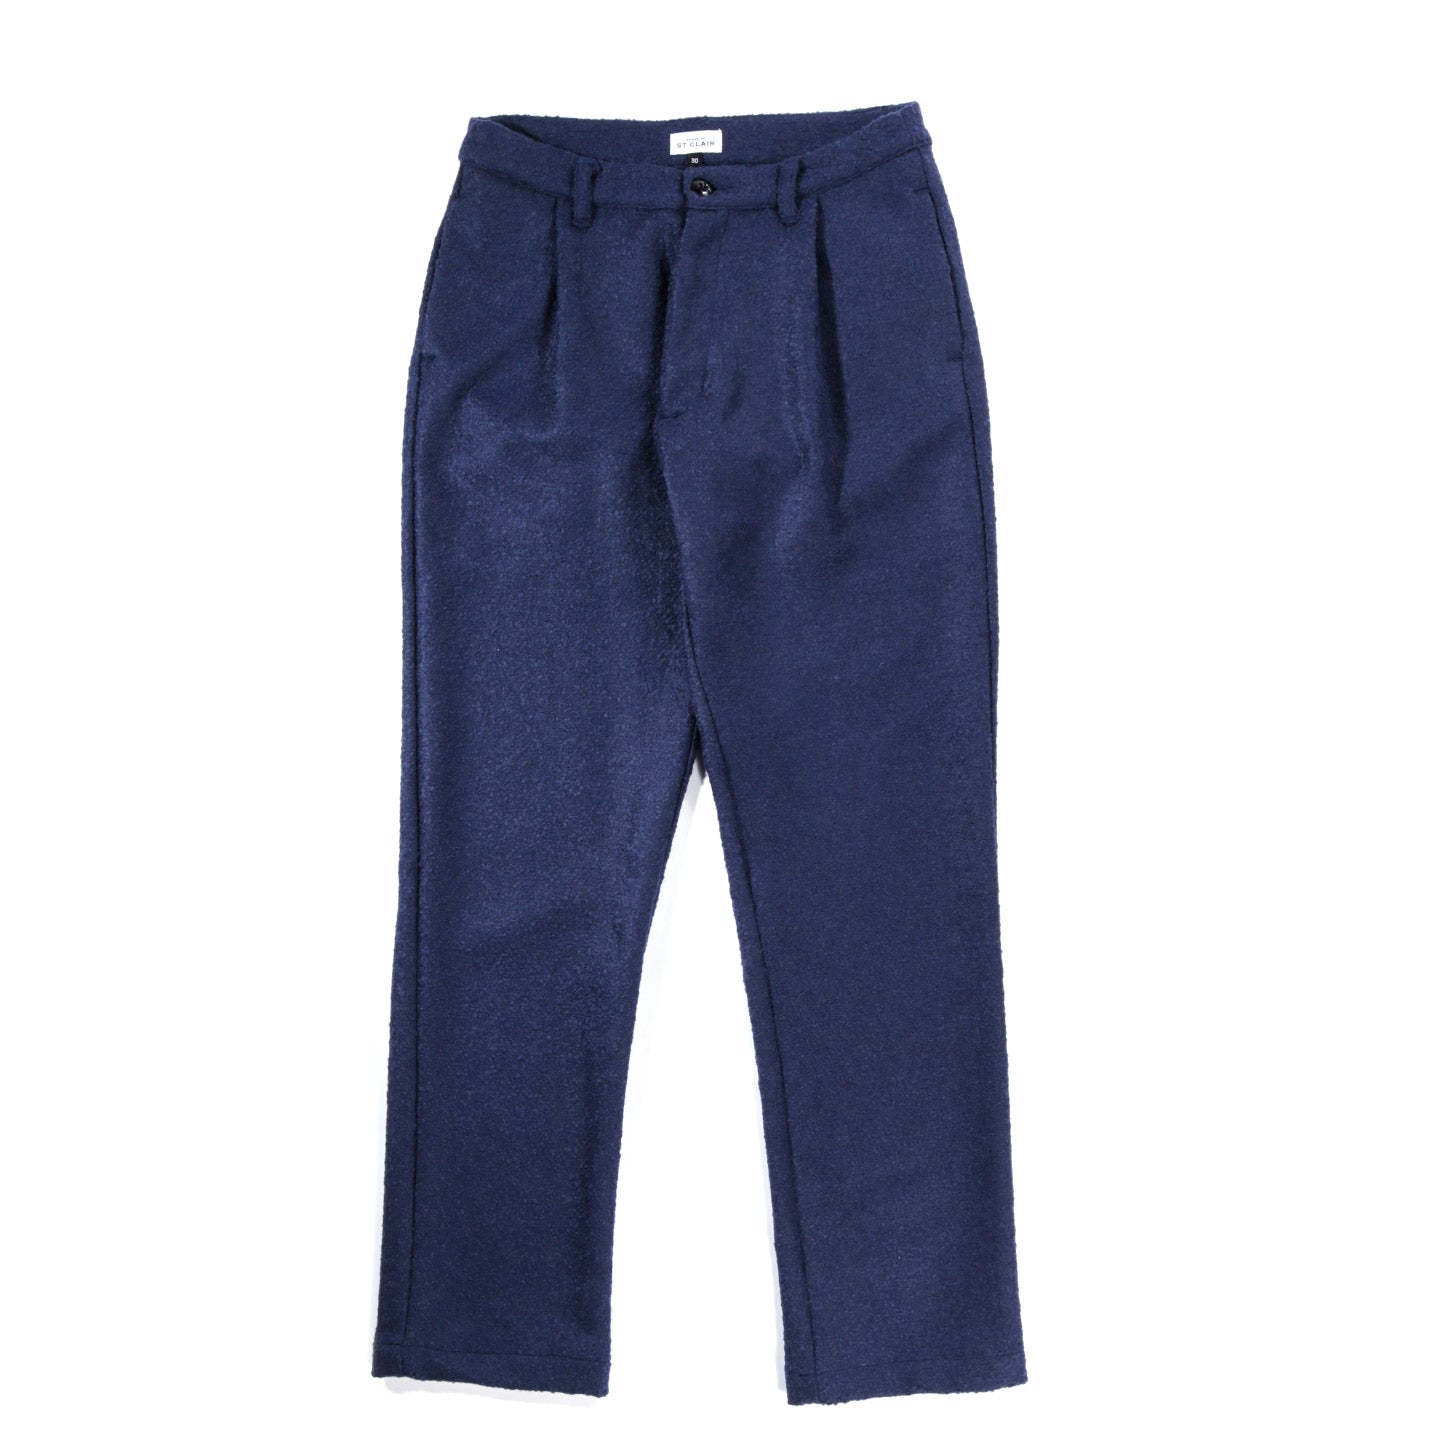 HOUSE OF ST. CLAIR SINGLE PLEAT TROUSER NAVY BOILED WOOL